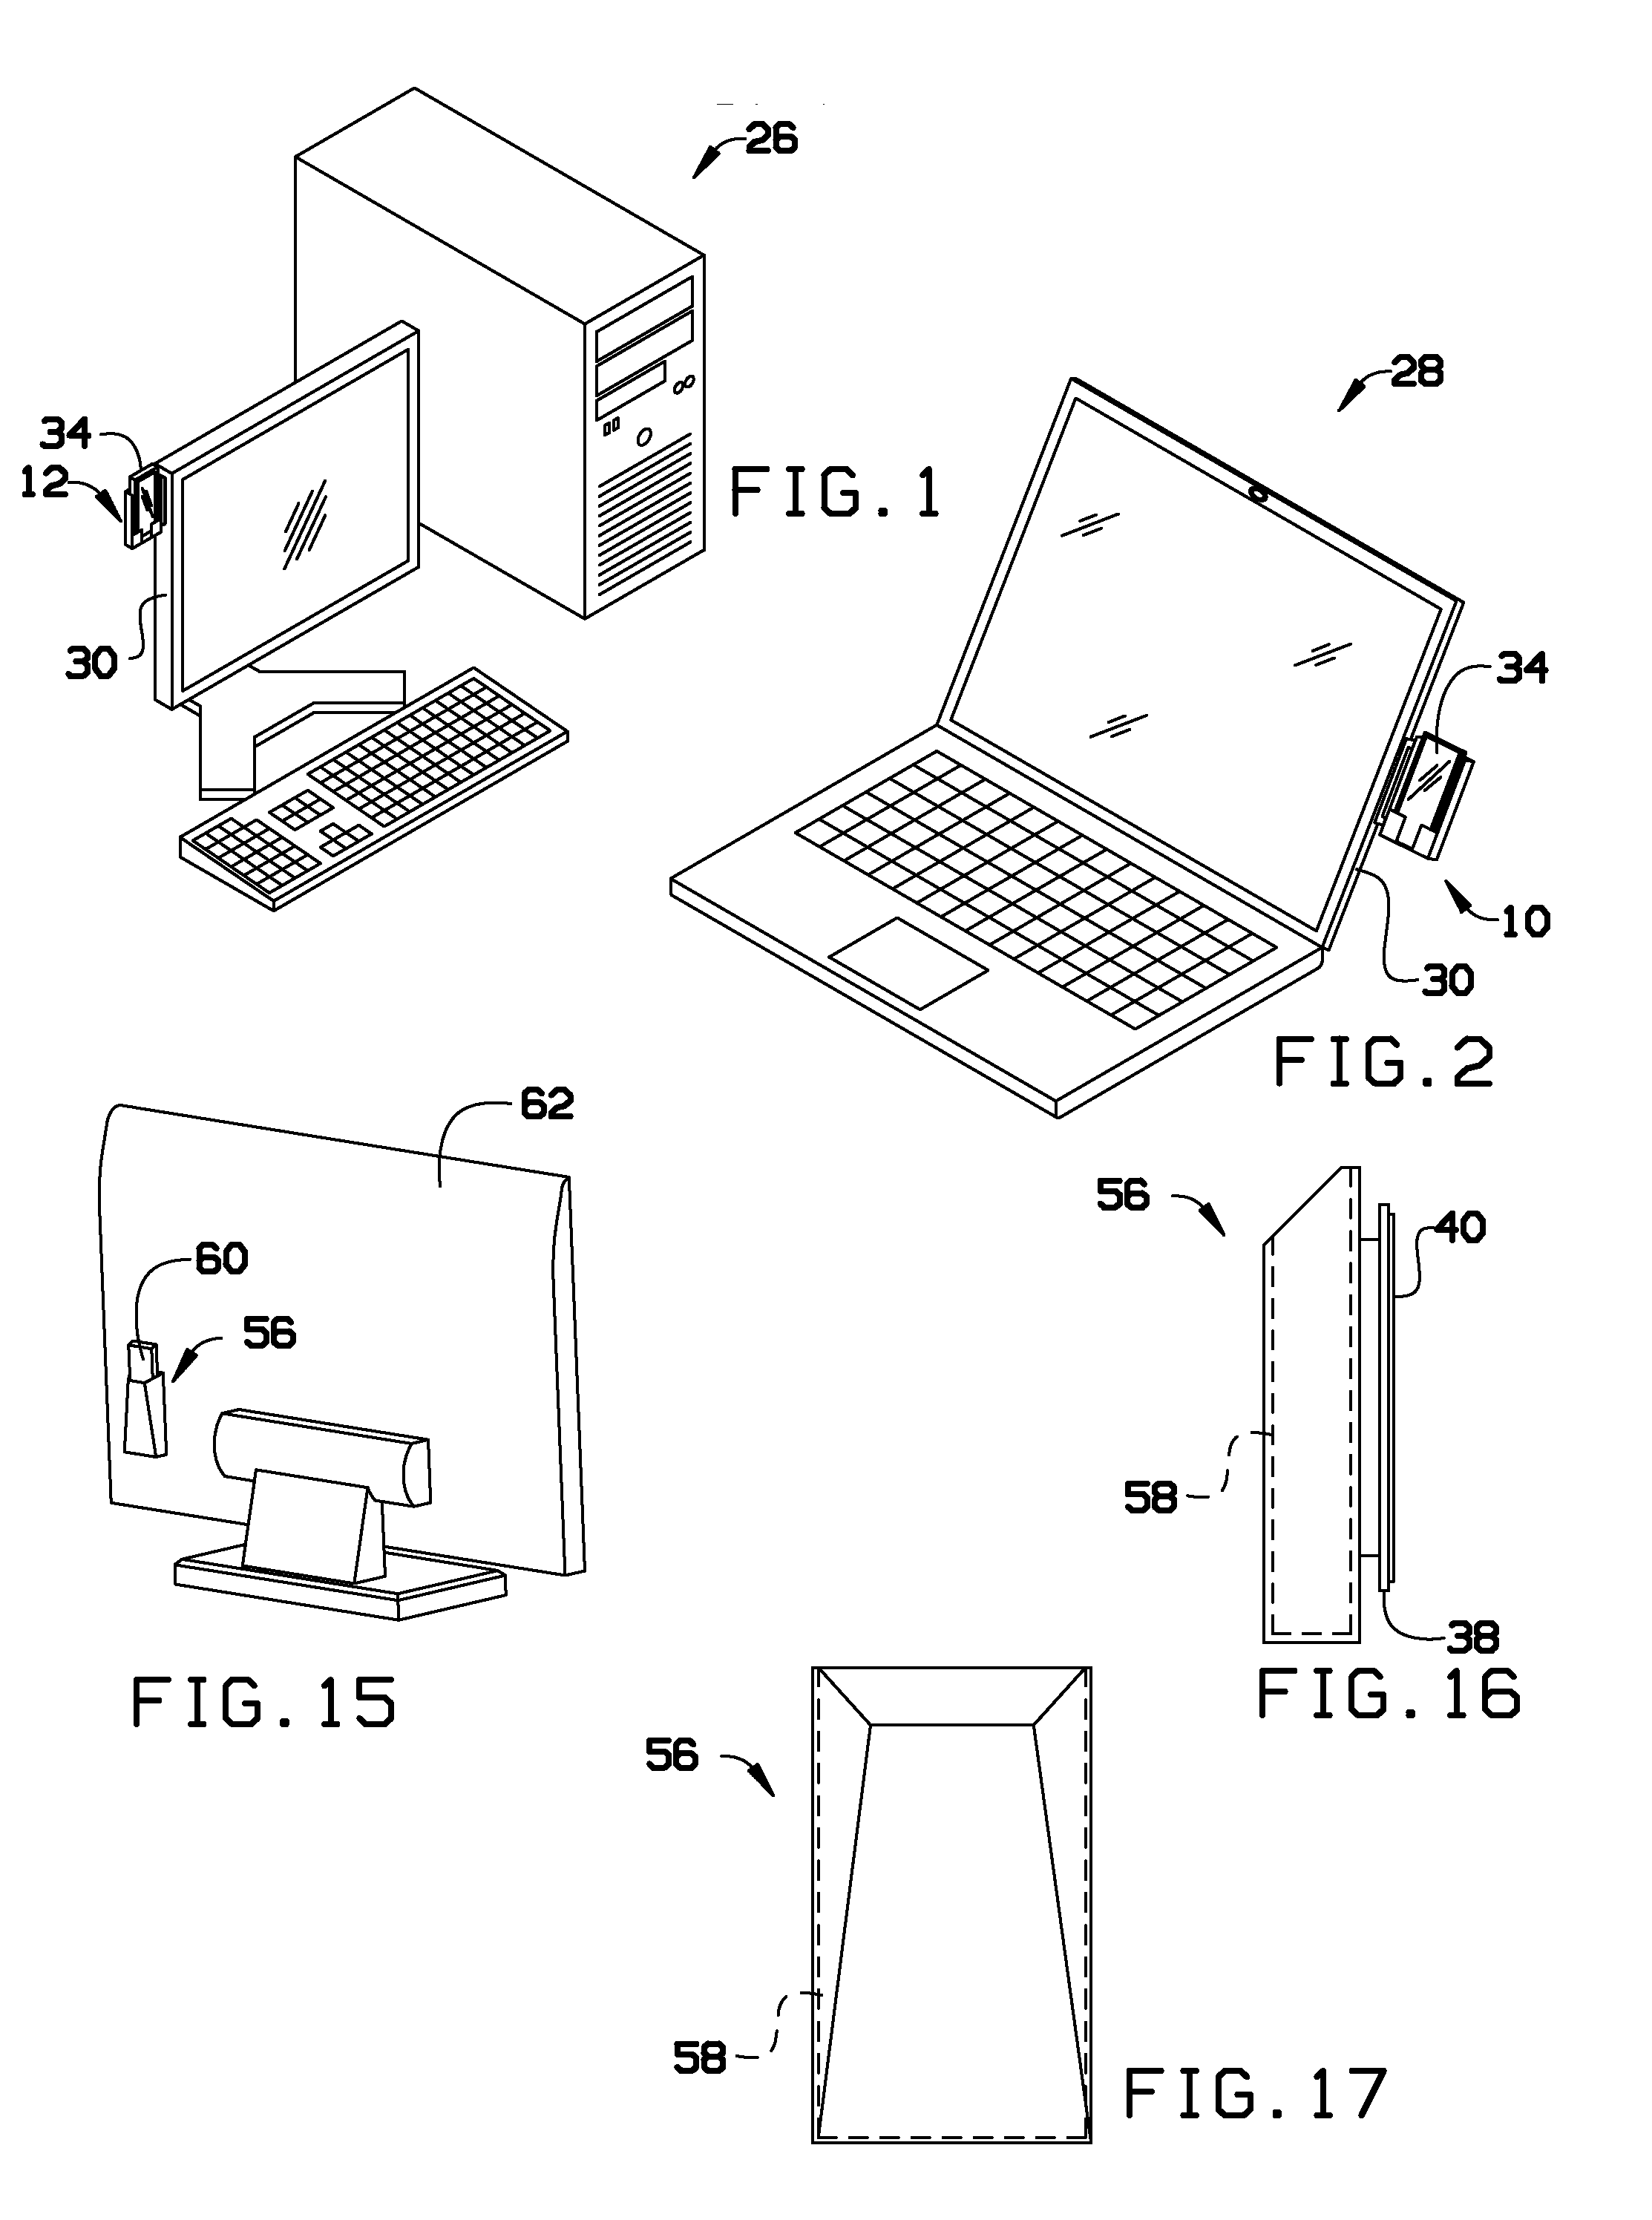 System for attaching accessories to a monitor